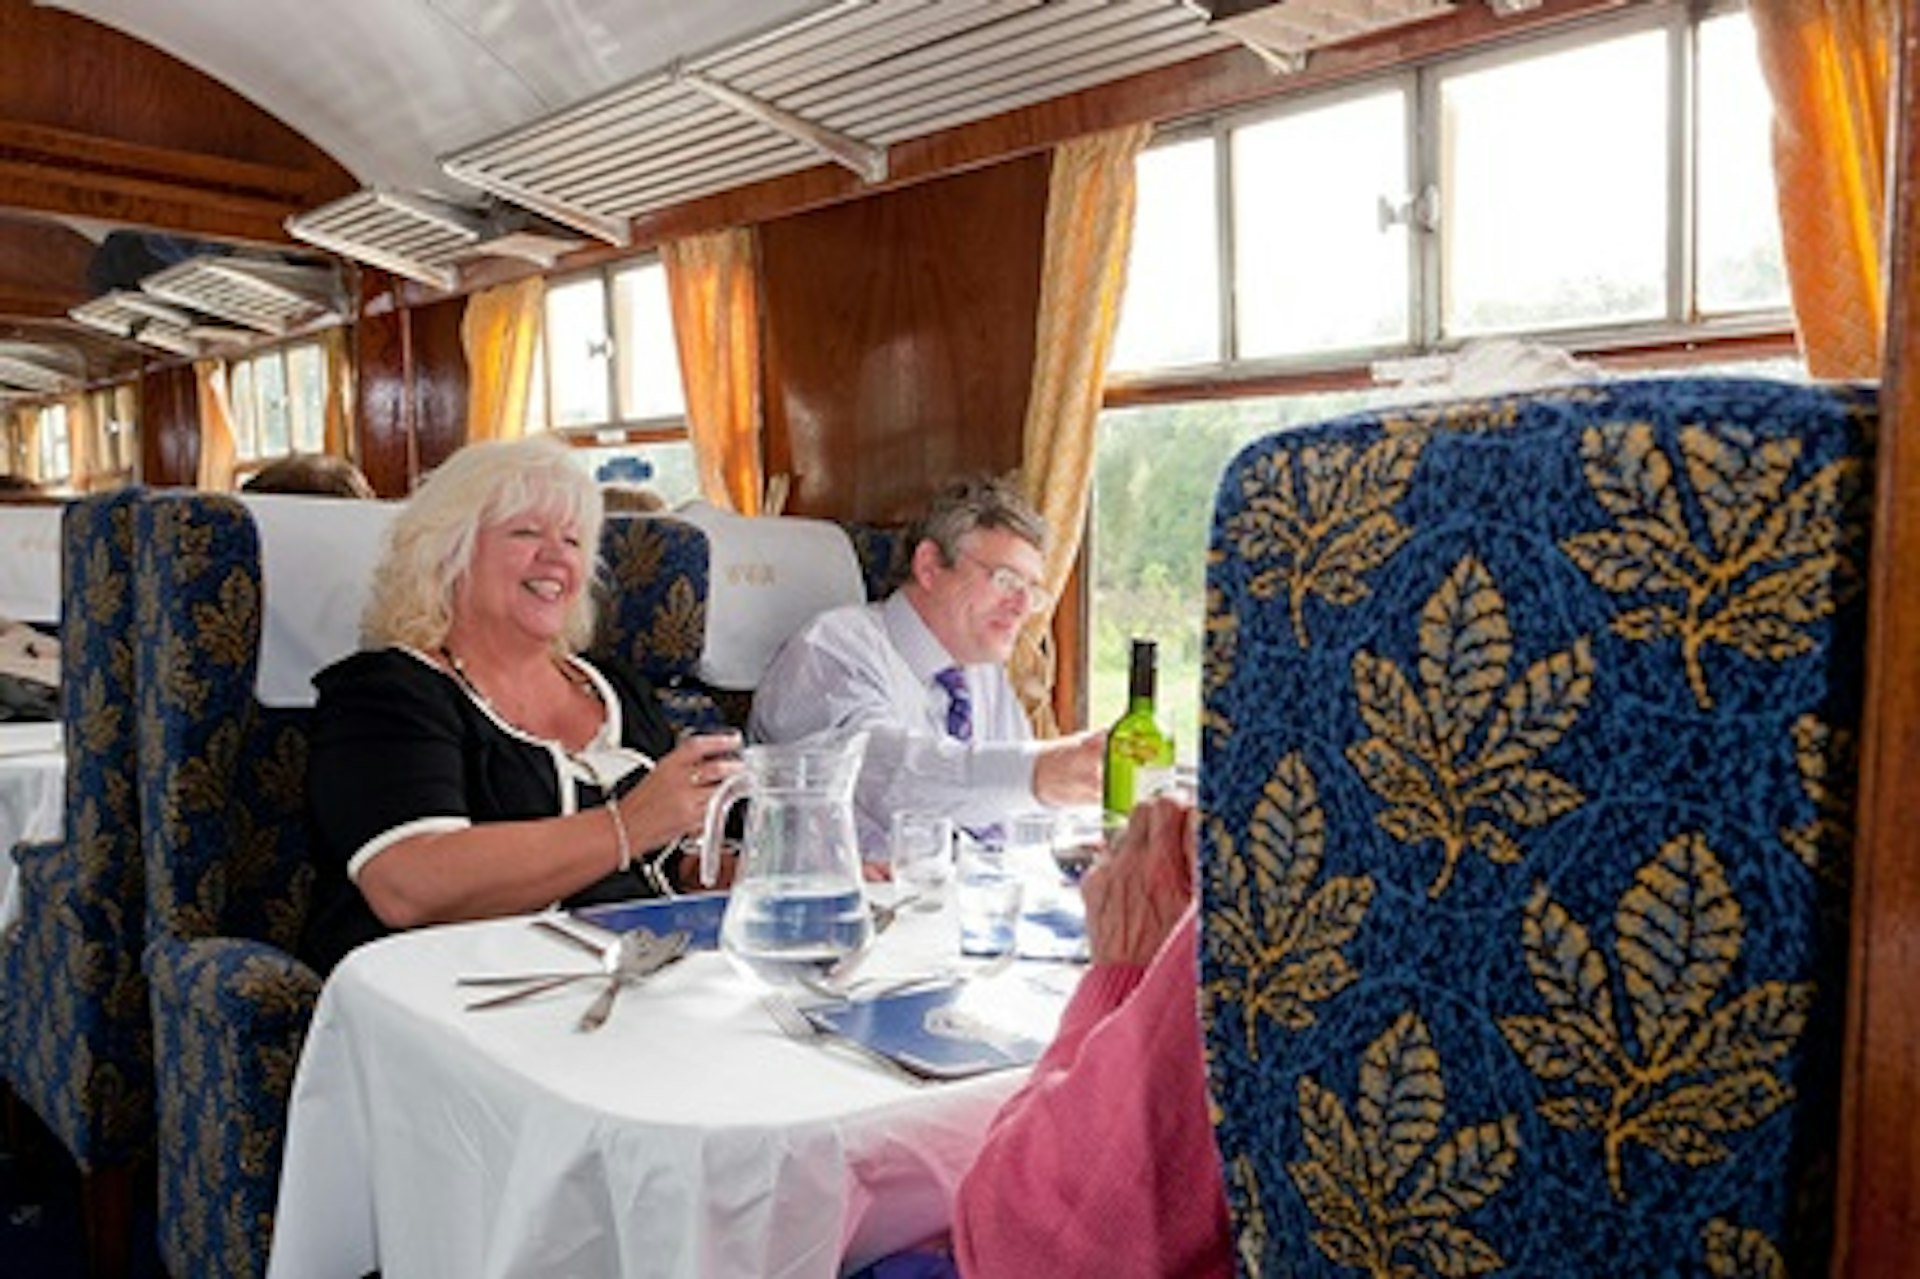 Charnwood Forester First Class Steam Train Dining Experience for Four 4